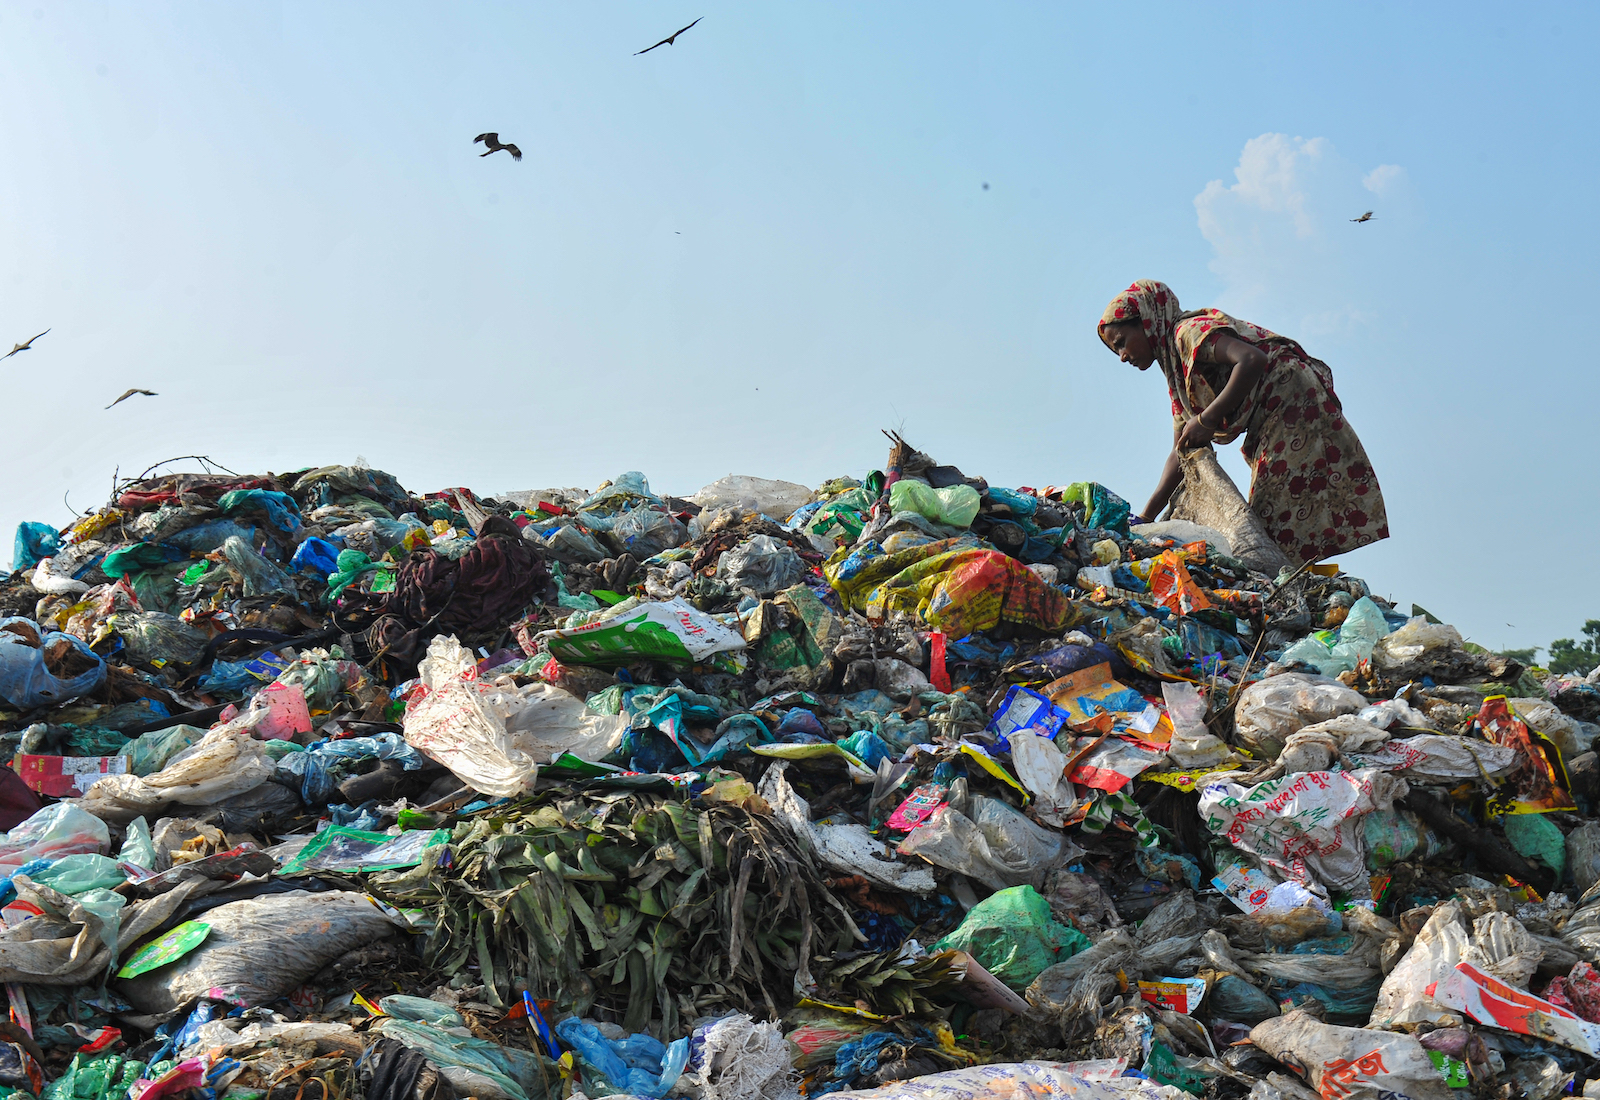 A woman picks up trash while standing atop a garbage heap